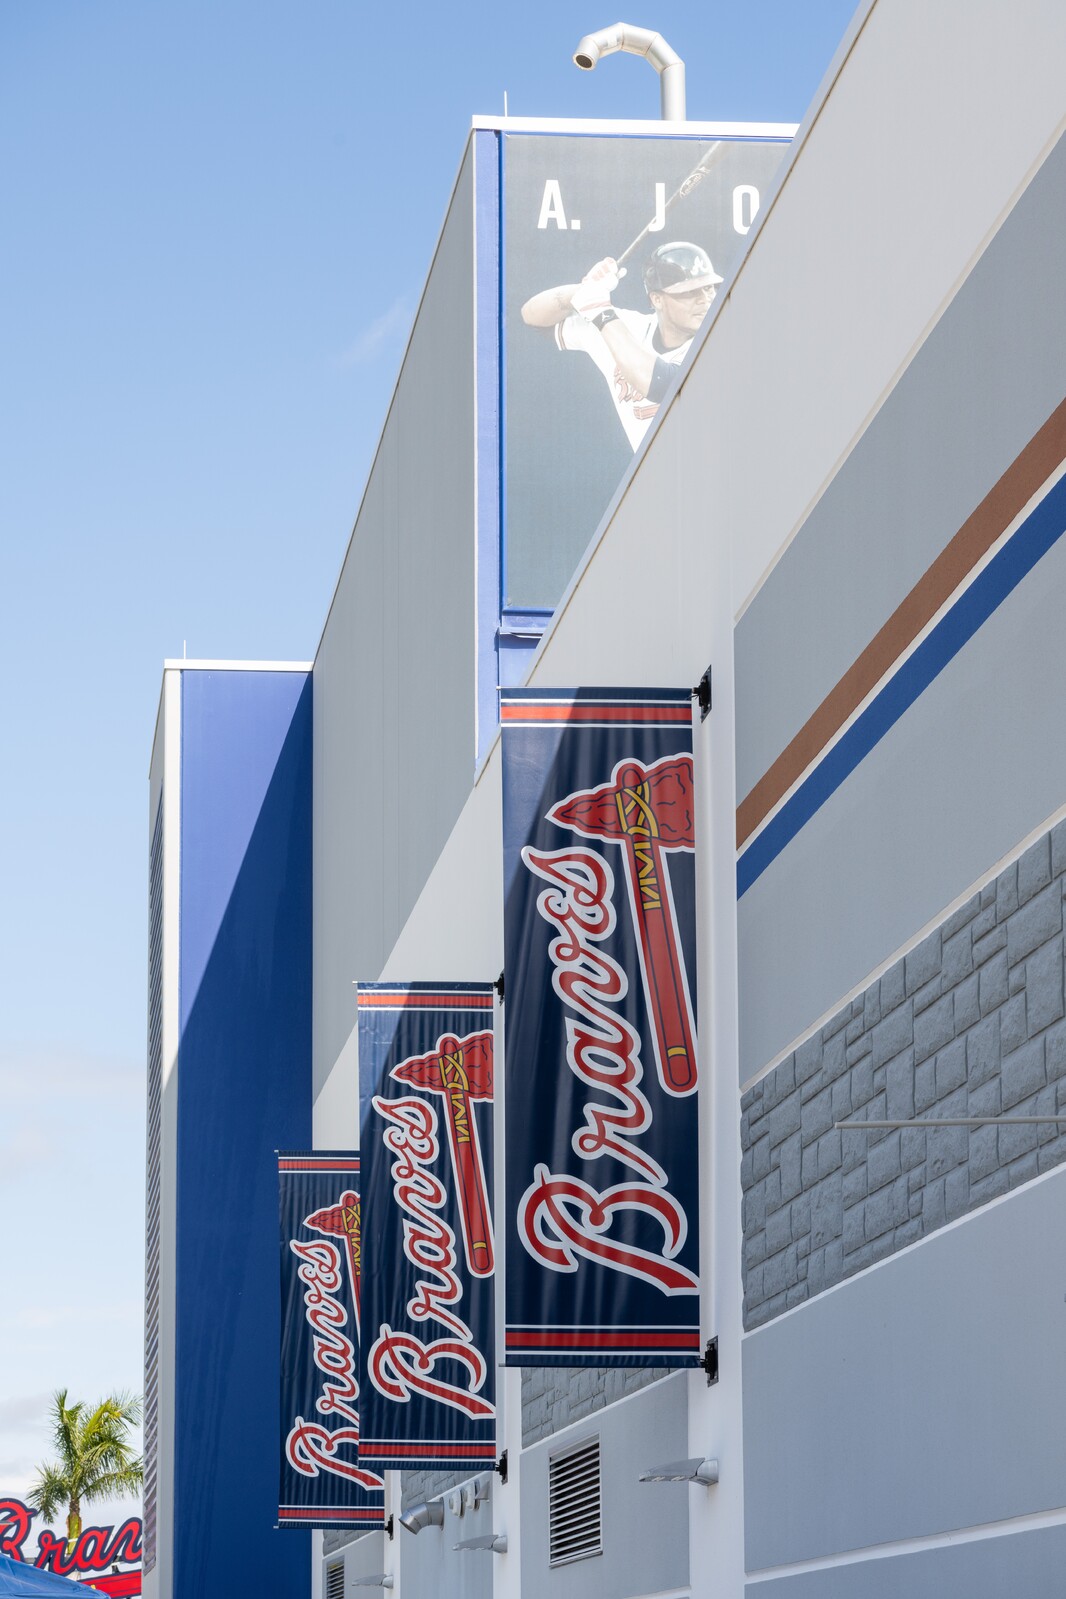 CoolToday Park - Stop by the Atlanta Braves Clubhouse Team